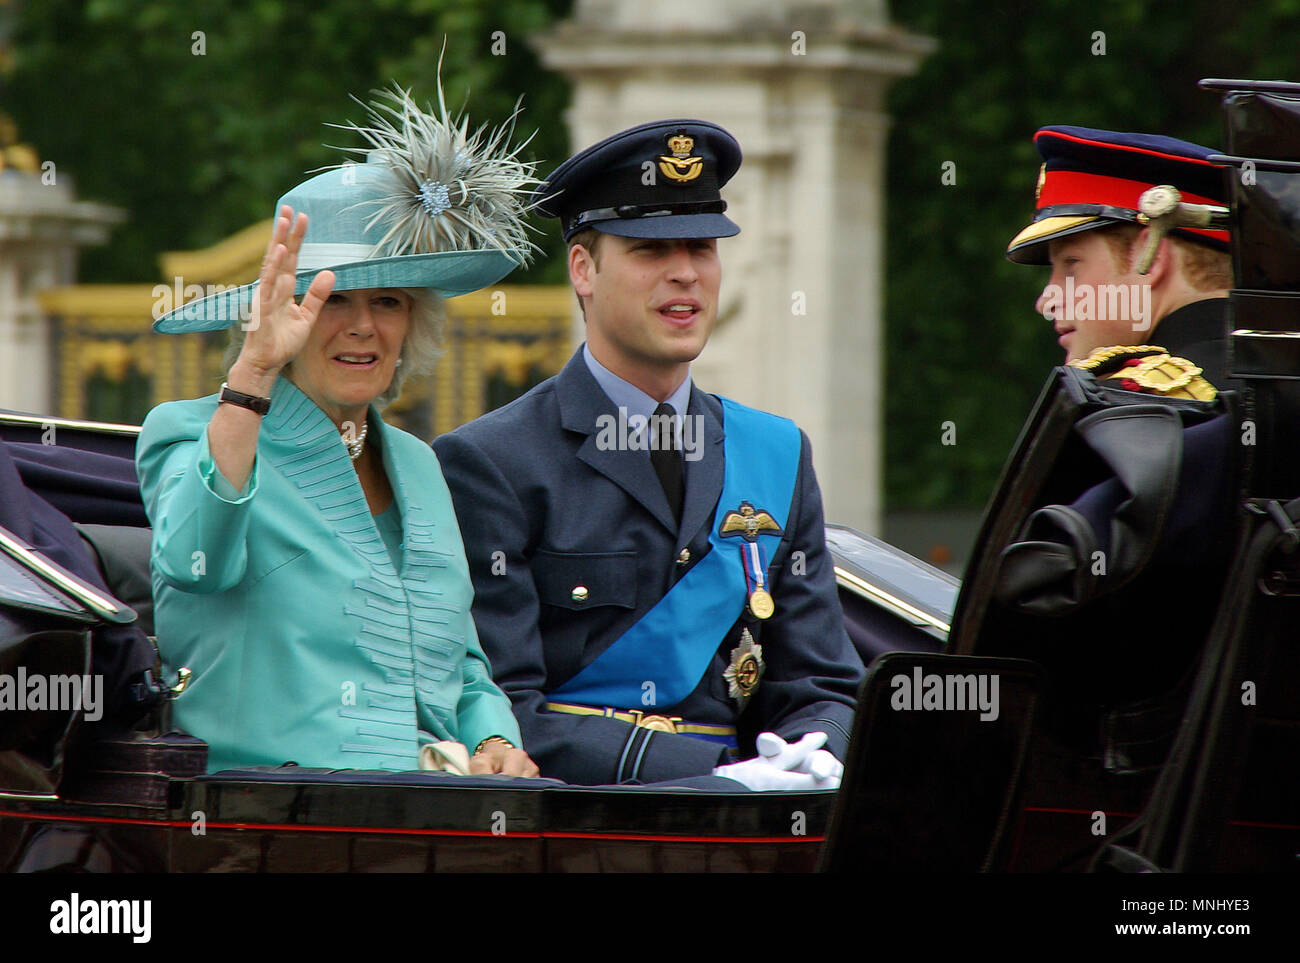 Prince William in RAF Royal Air Force uniform, Duchess of Cornwall Camilla and Prince Harry Wales in carriage during Trooping the Colour, London Stock Photo